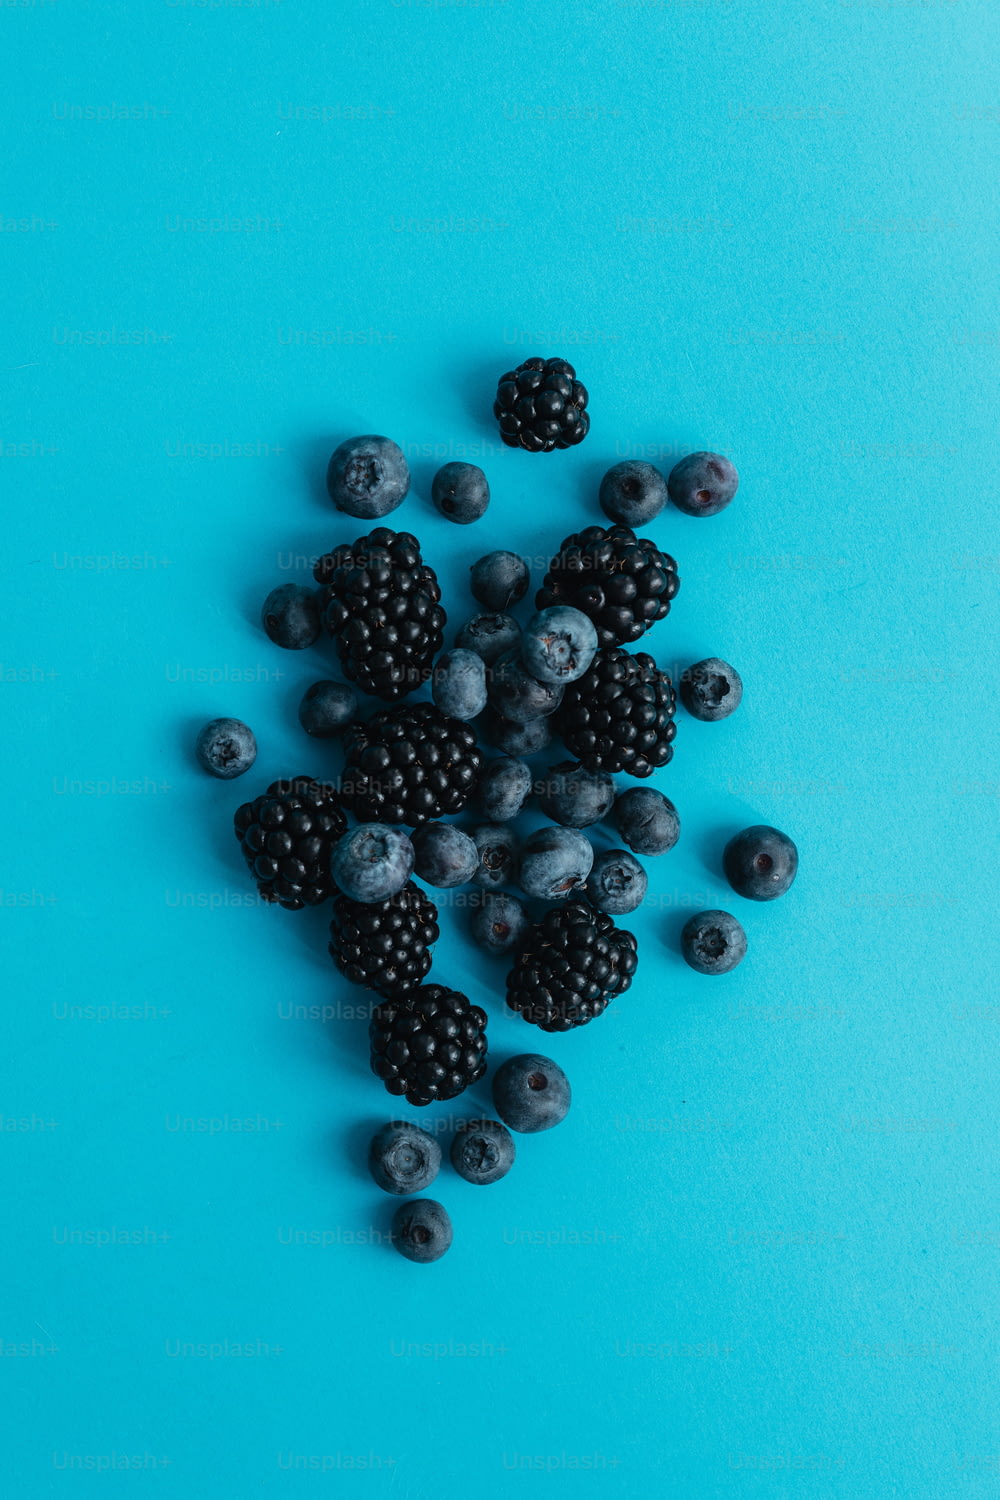 a pile of berries and blueberries on a blue background